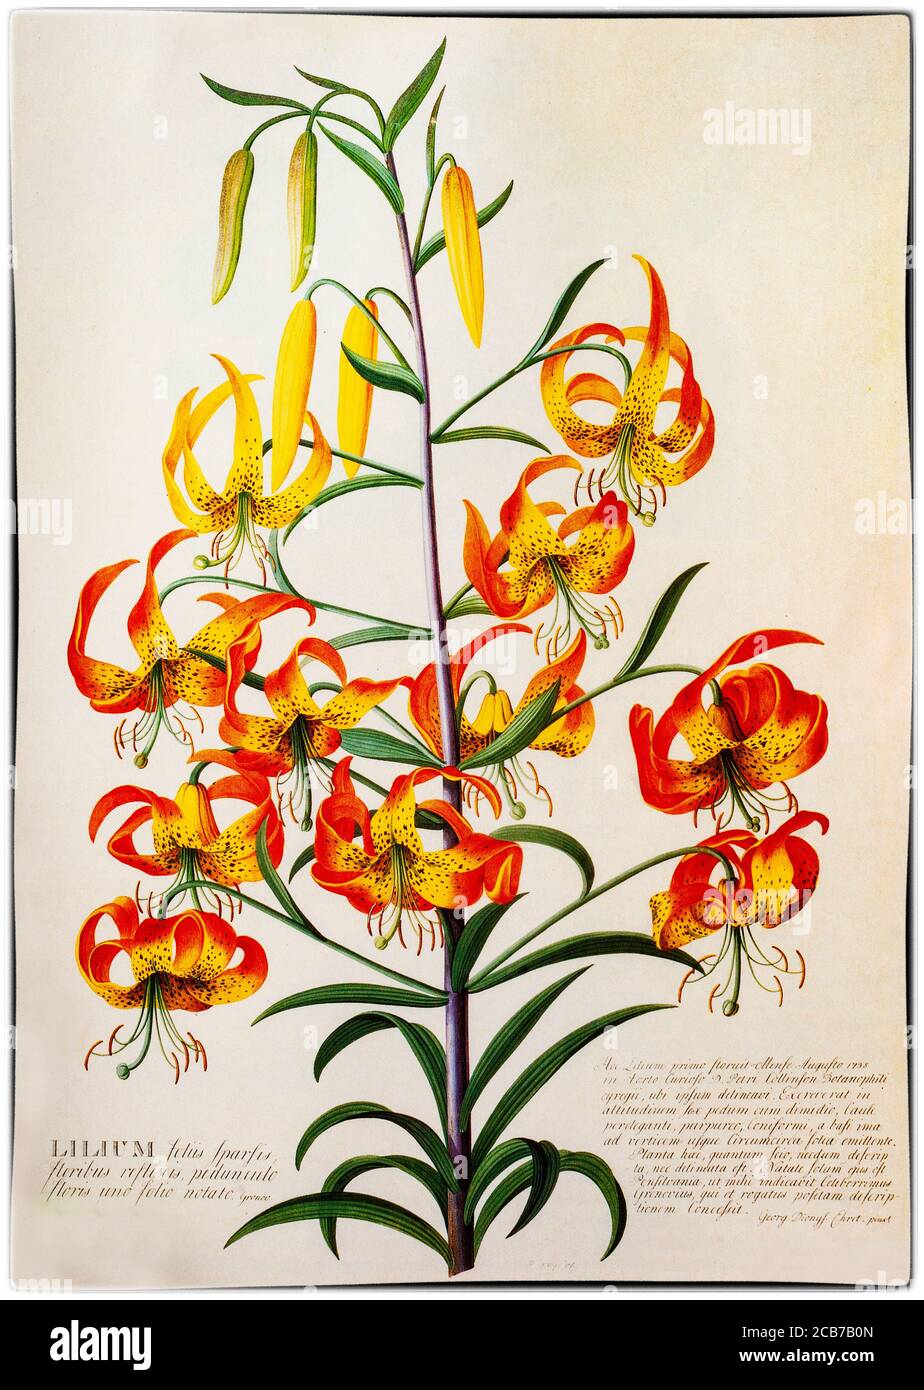 An American Turk's Cap Lily, Lilium superbum, painted by Georg Dionysius Ehret (1708-1770), a German botanist and entomologist known for his botanical illustrations who became one of the most influential European botanical artists of all time. His first illustrations were in collaboration with Carl Linnaeus and George Clifford in 1735-1736. Clifford, a wealthy Dutch banker and governor of the Dutch East India Company was a keen botanist with a large herbarium. Stock Photo